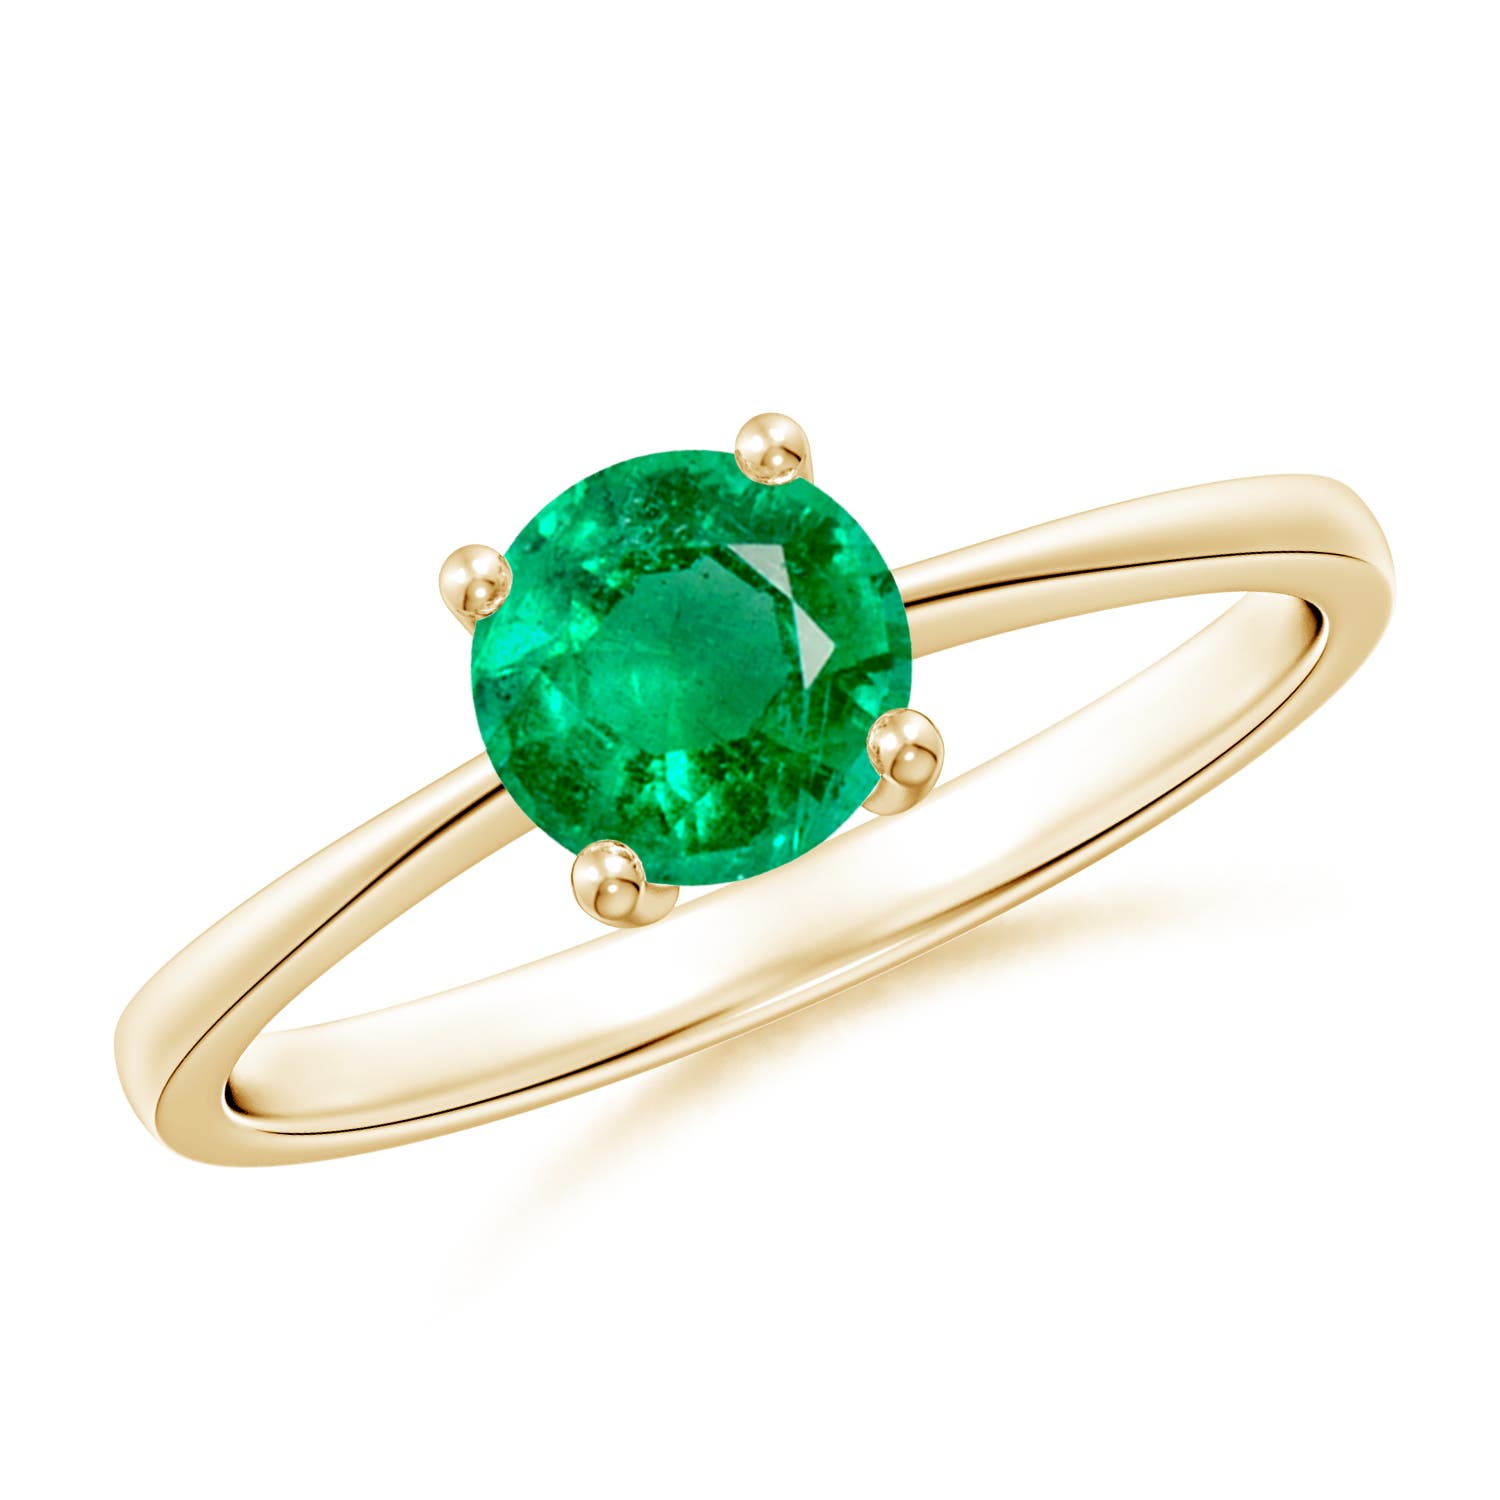 AAA - Emerald / 0.75 CT / 14 KT Yellow Gold